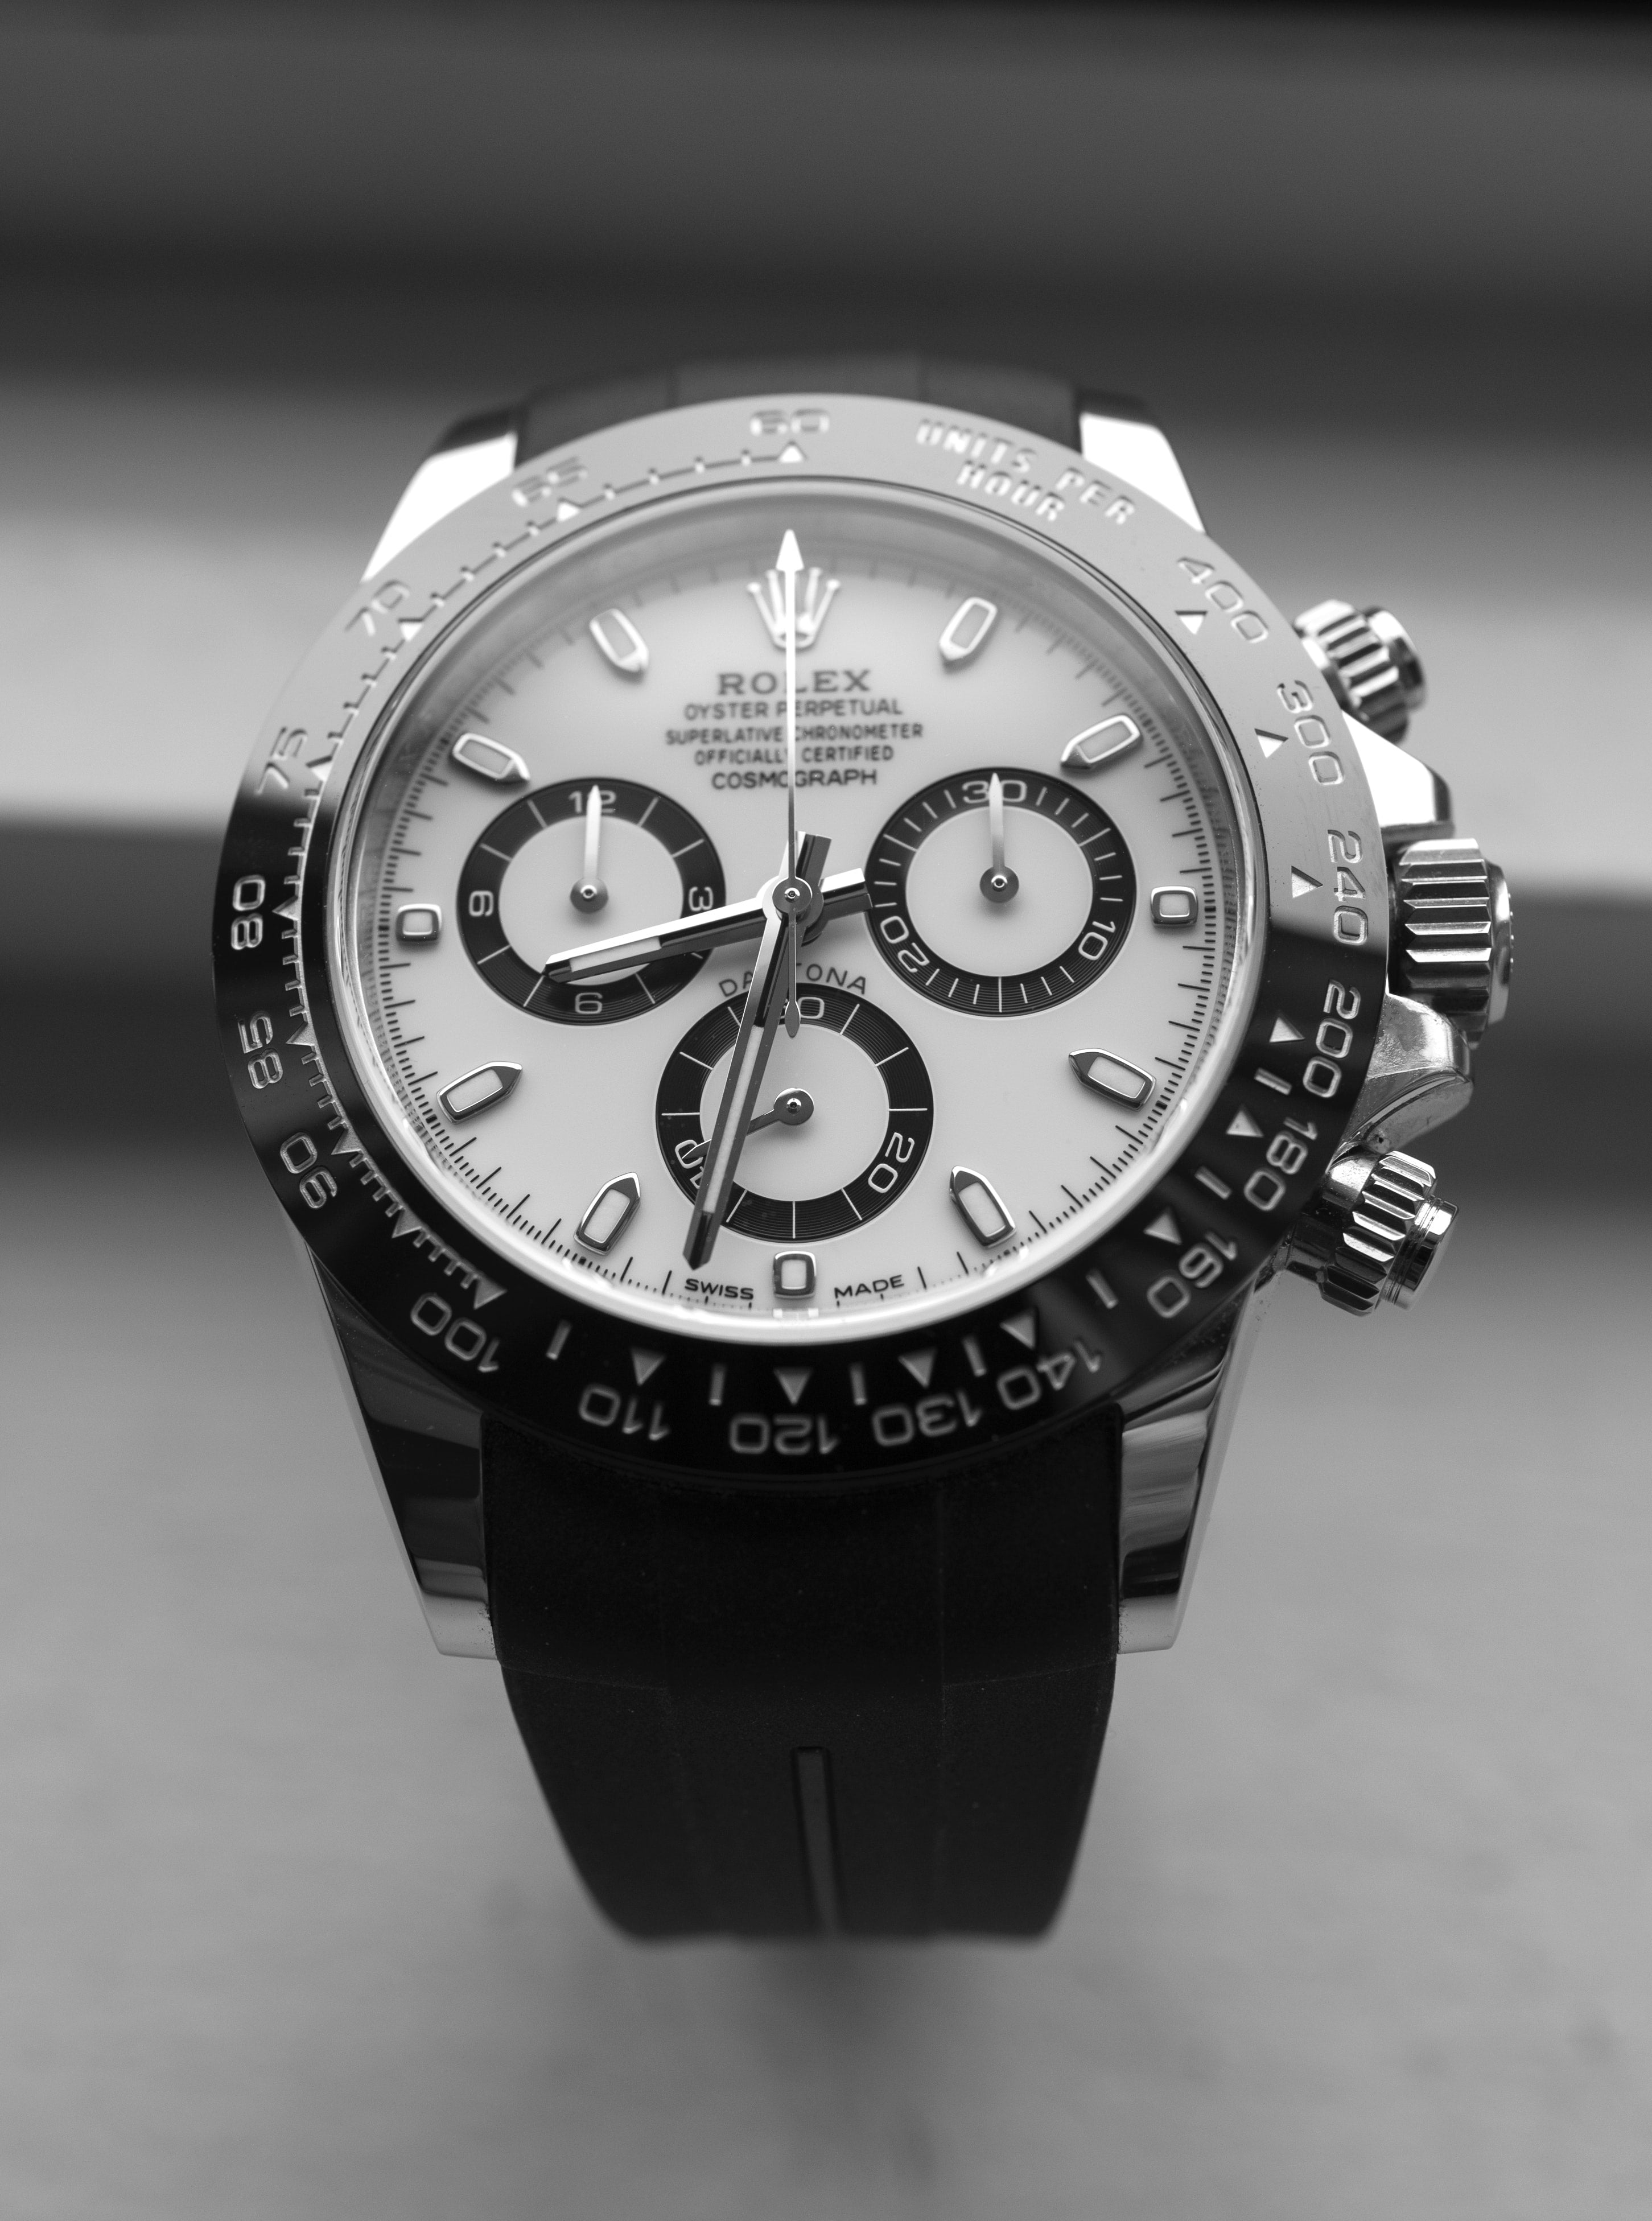 Top G Watches Pty Ltd - Inexpensive Luxury Never Looked So Good